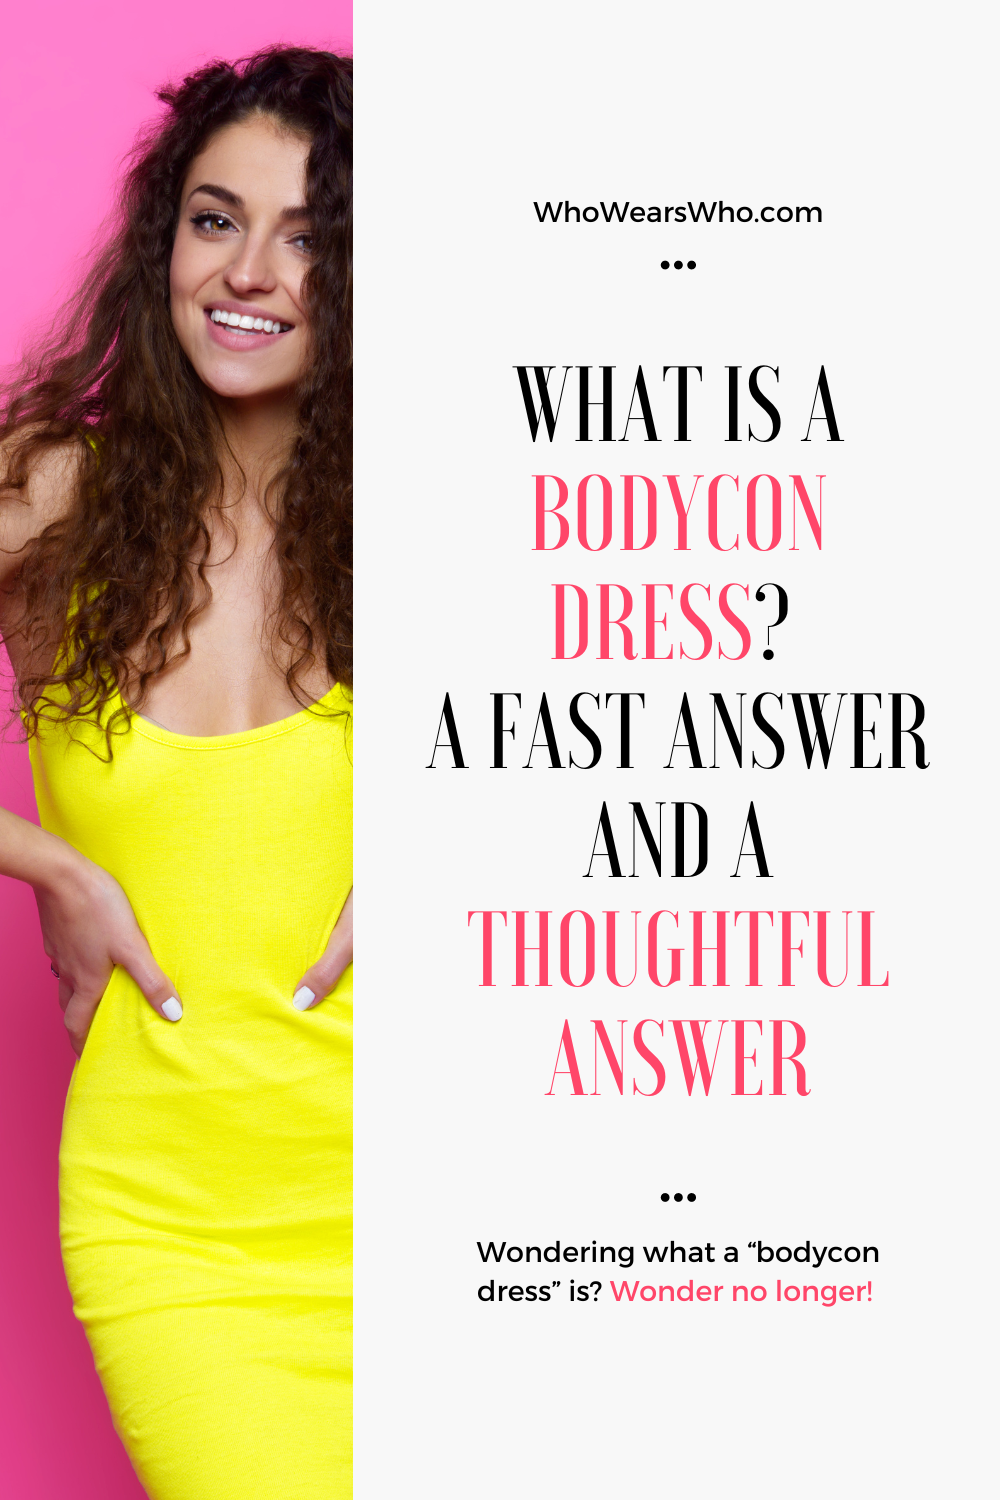 What is a bodycon dress